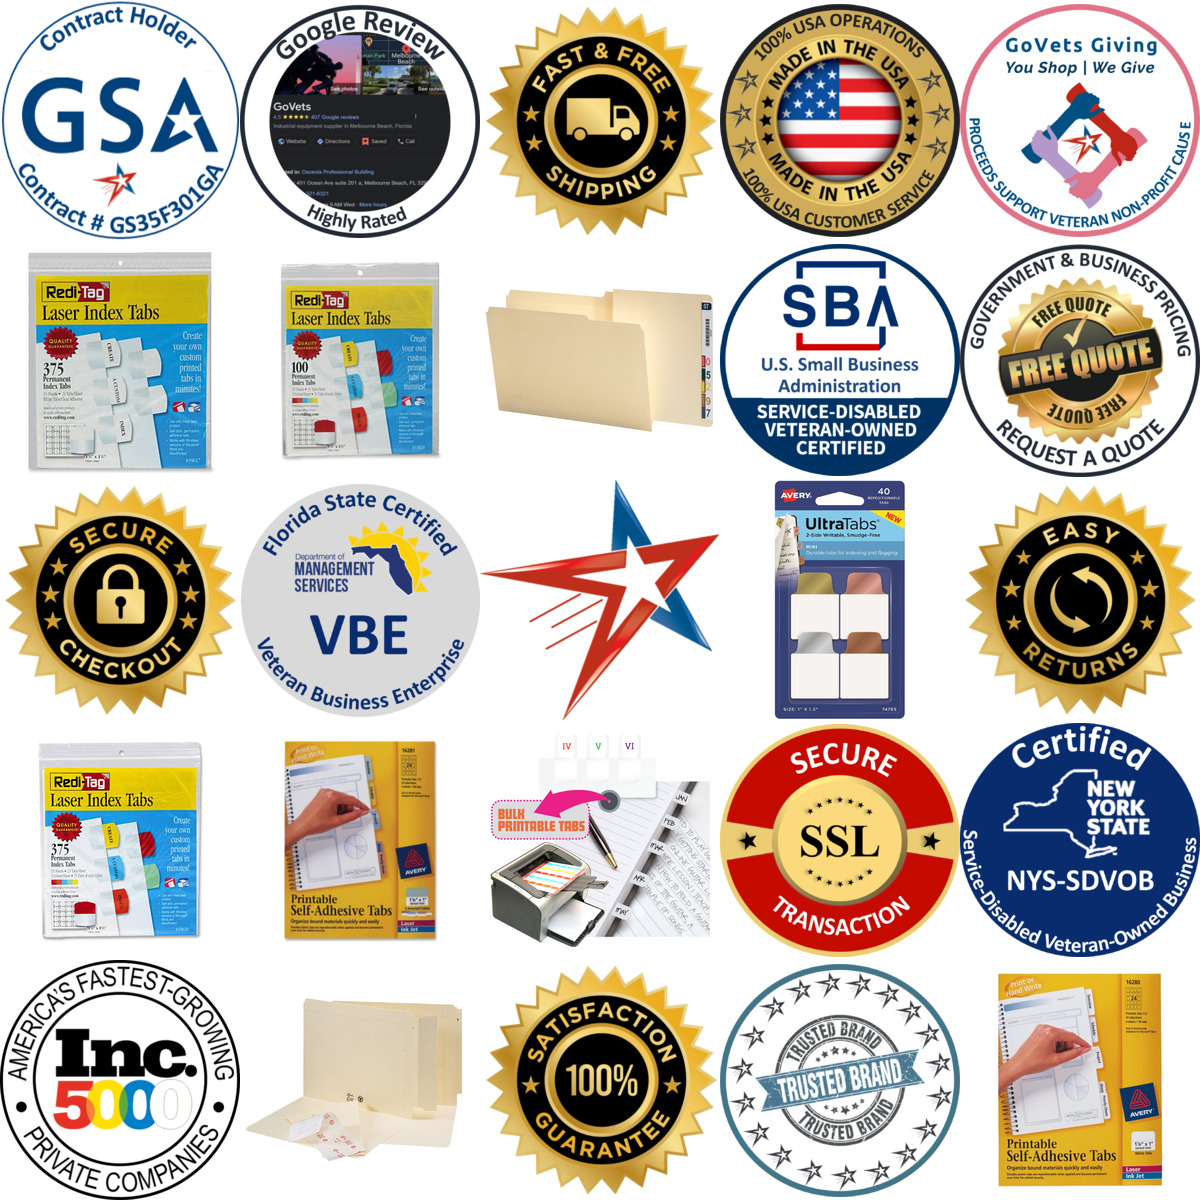 A selection of Sticky Tabs products on GoVets